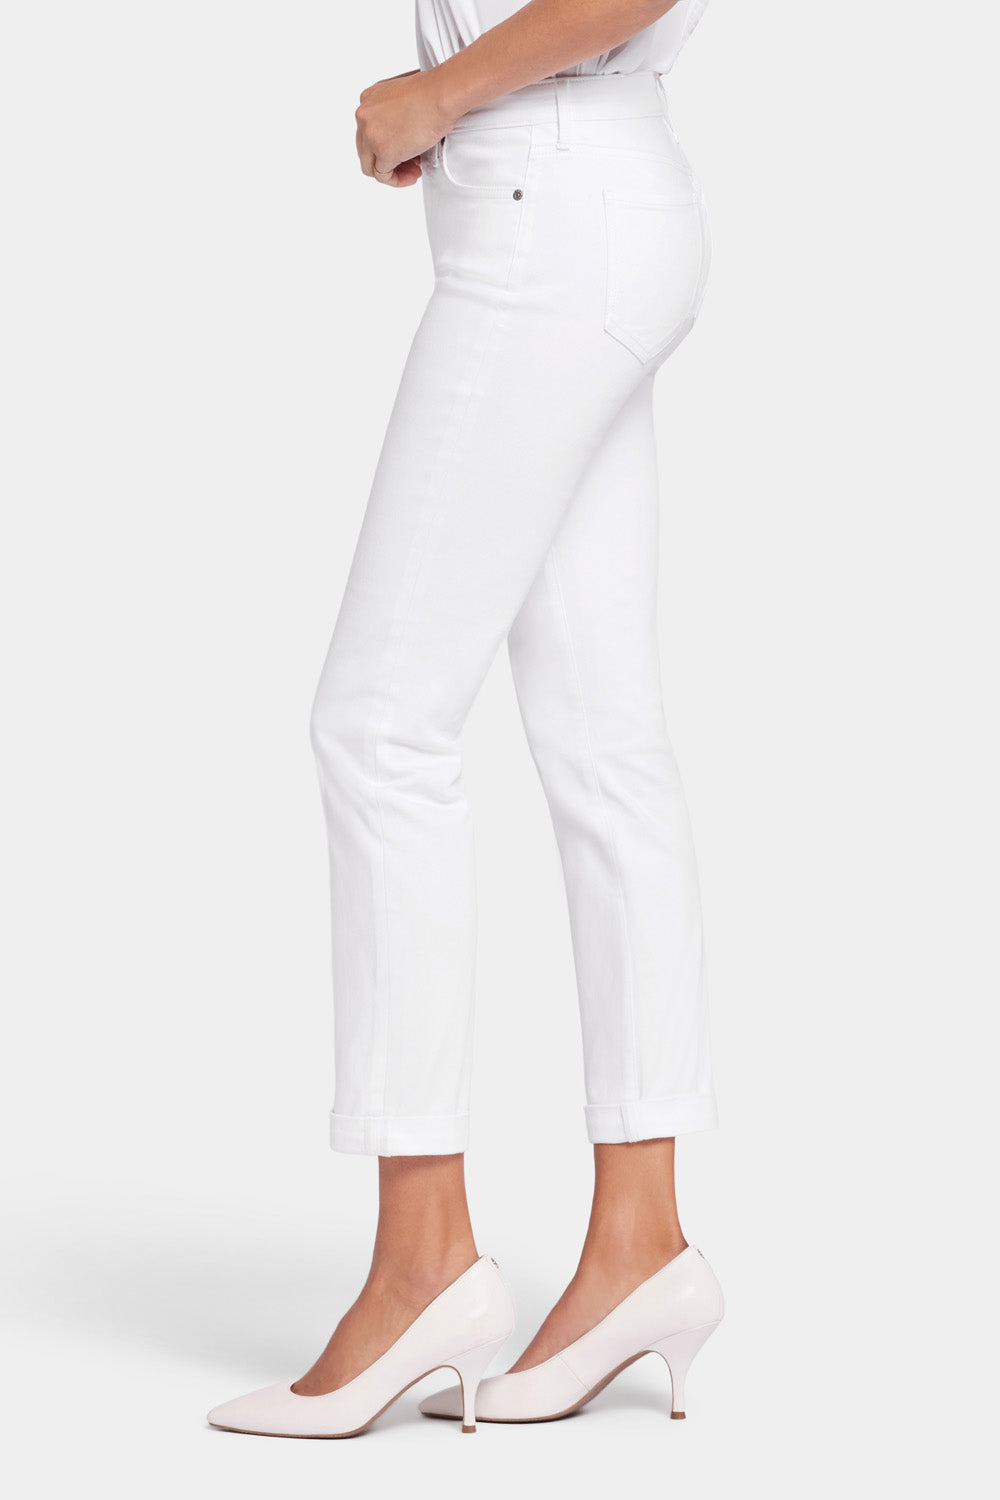 NYDJ Sheri Slim Ankle Jeans With Roll Cuffs - Optic White